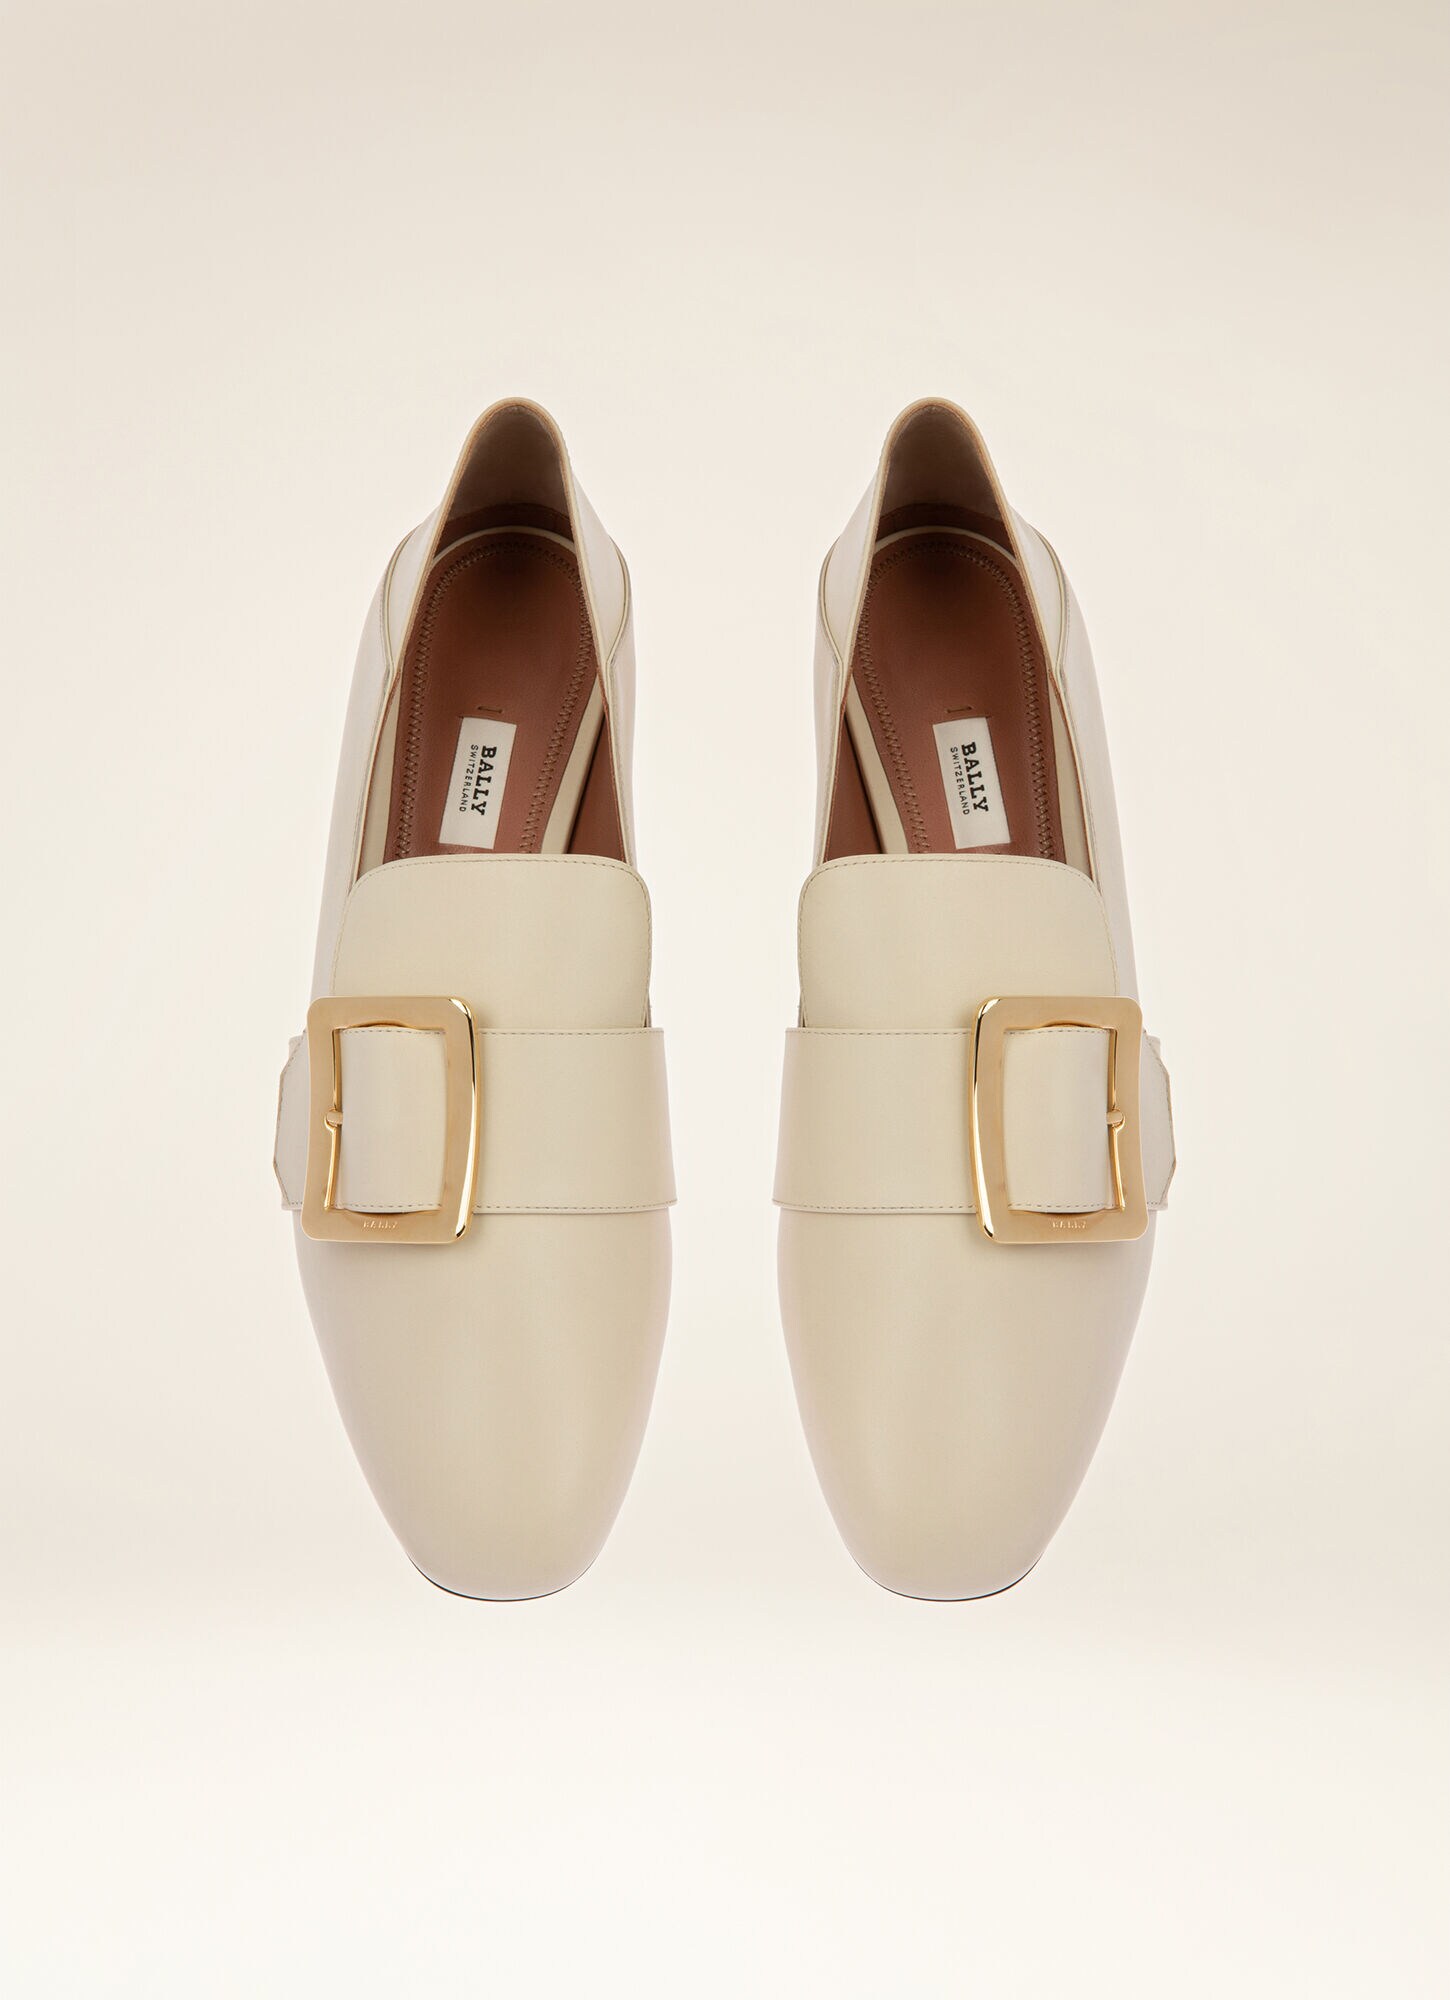 Bally soft leather loafers